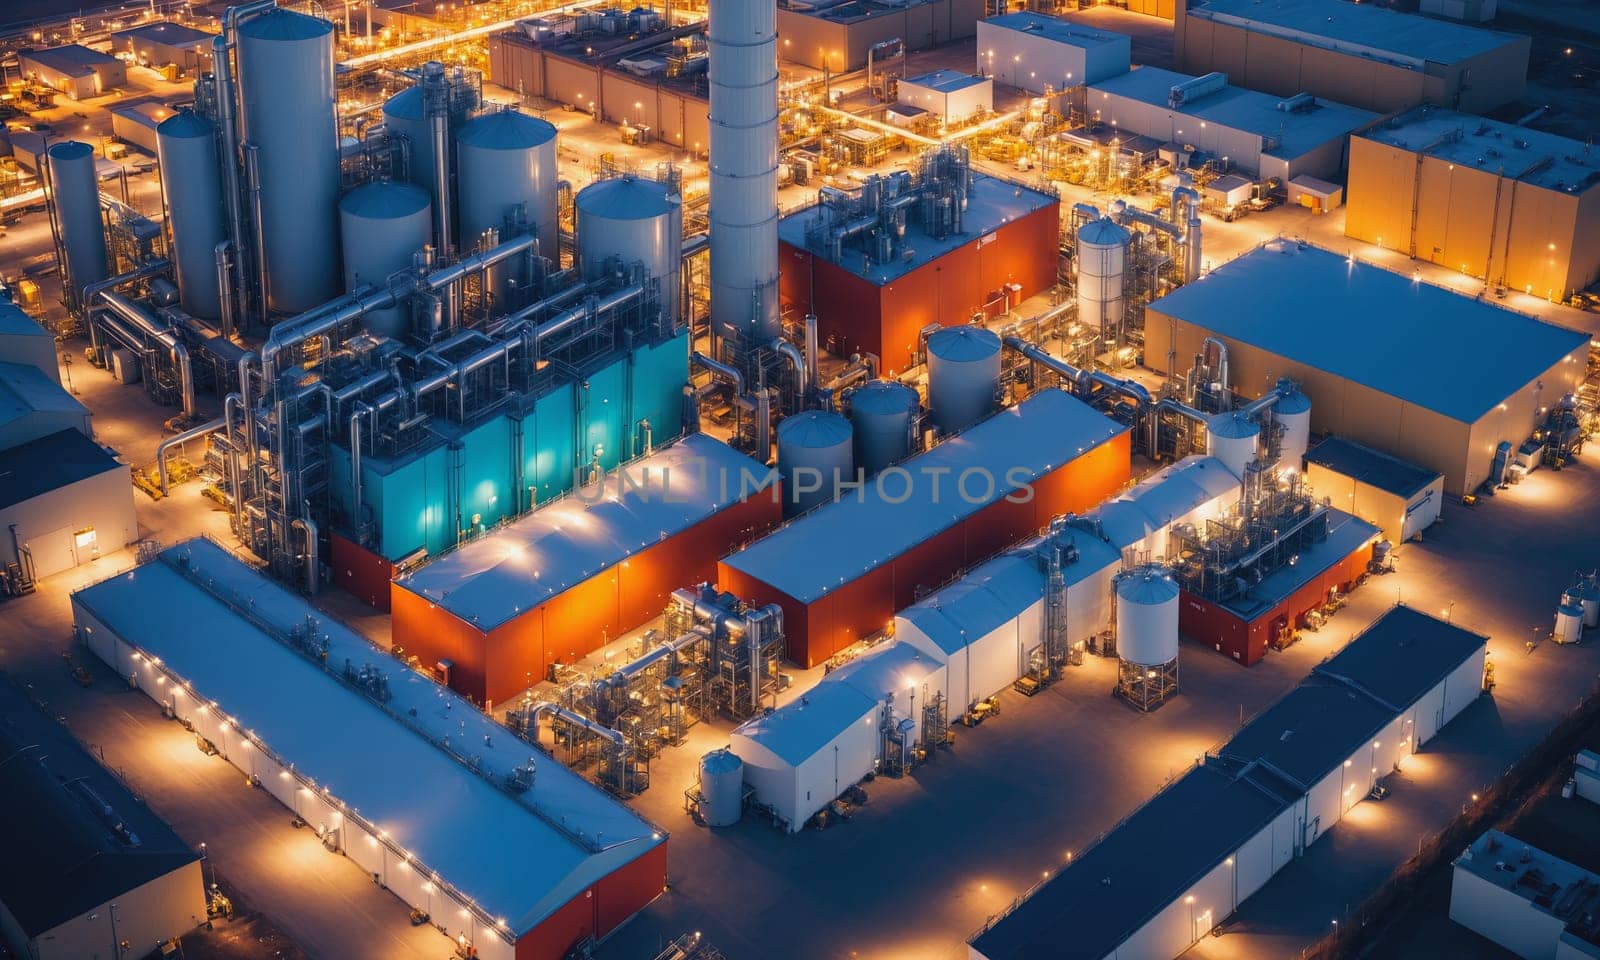 An illuminated industrial complex at dusk. View from above by Andre1ns